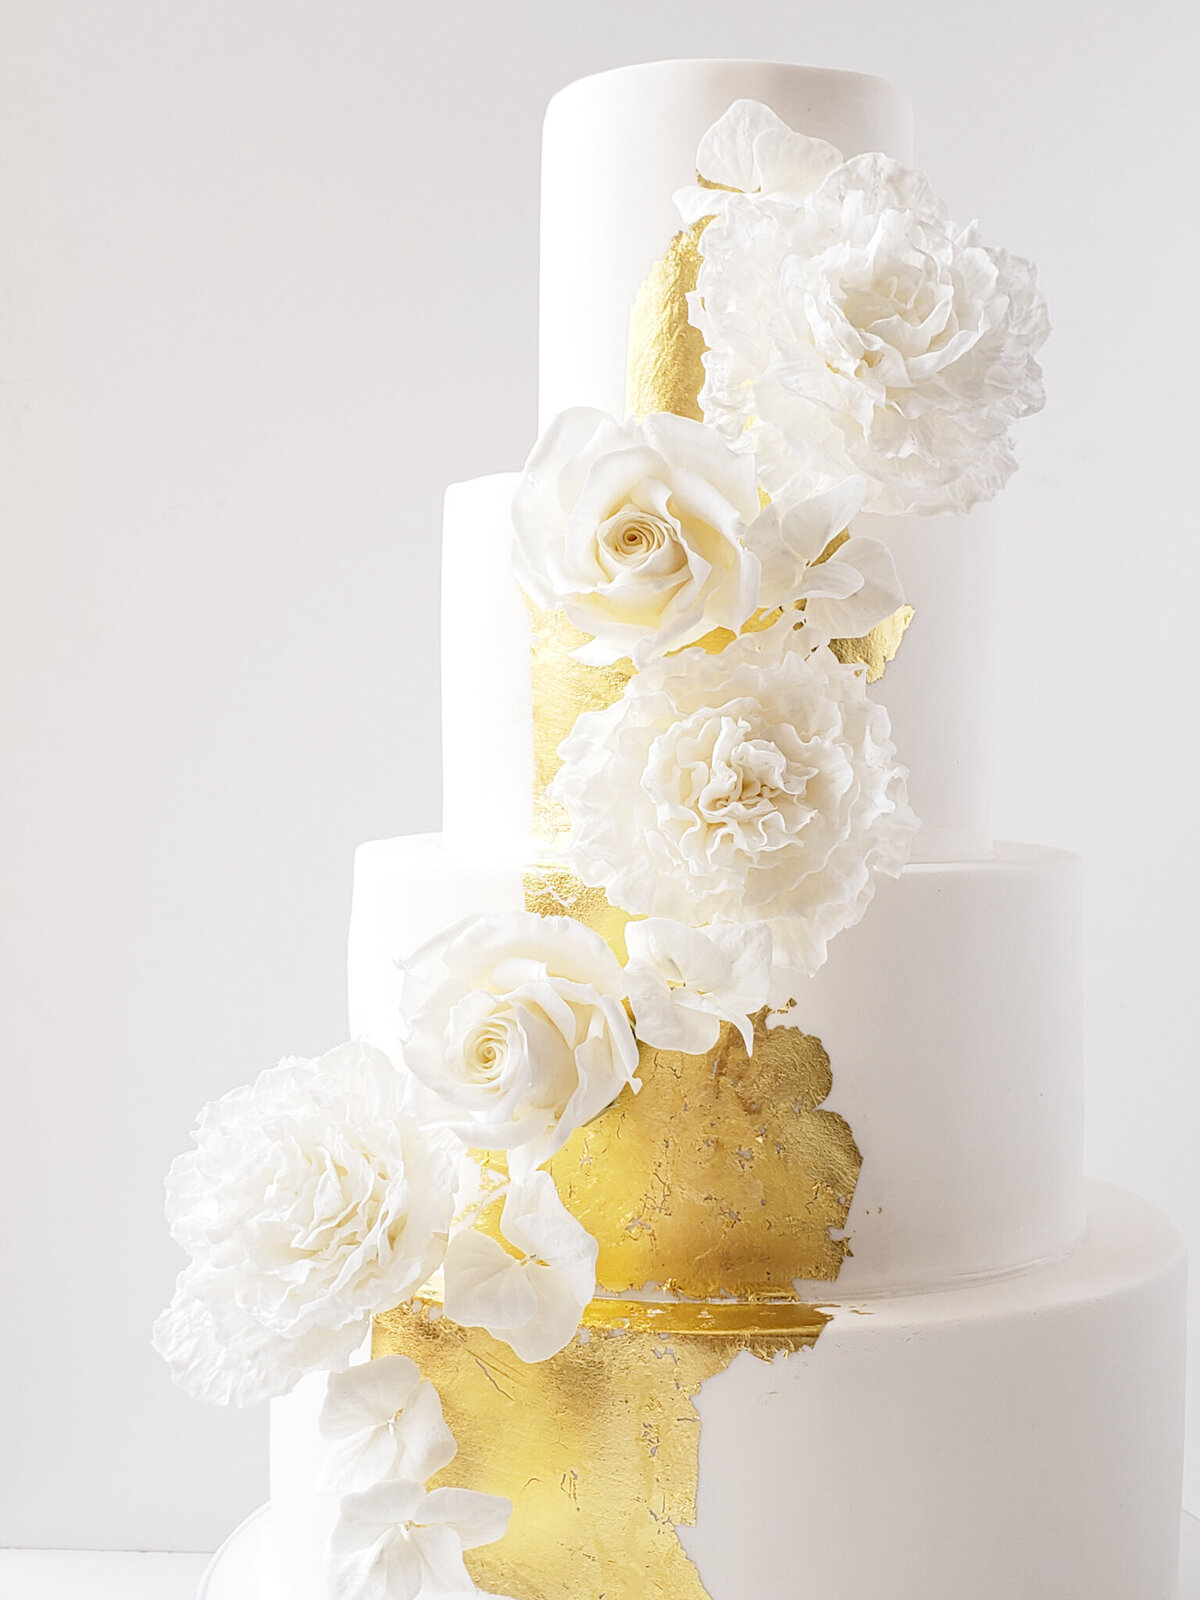 Elegant 3 tier white wedding cake with gold foil details and white roses cascading, created by Brianne Gabrielle Cakes,  elegant cakes & desserts in Edmonton, AB, featured on the Brontë Bride Vendor Guide.